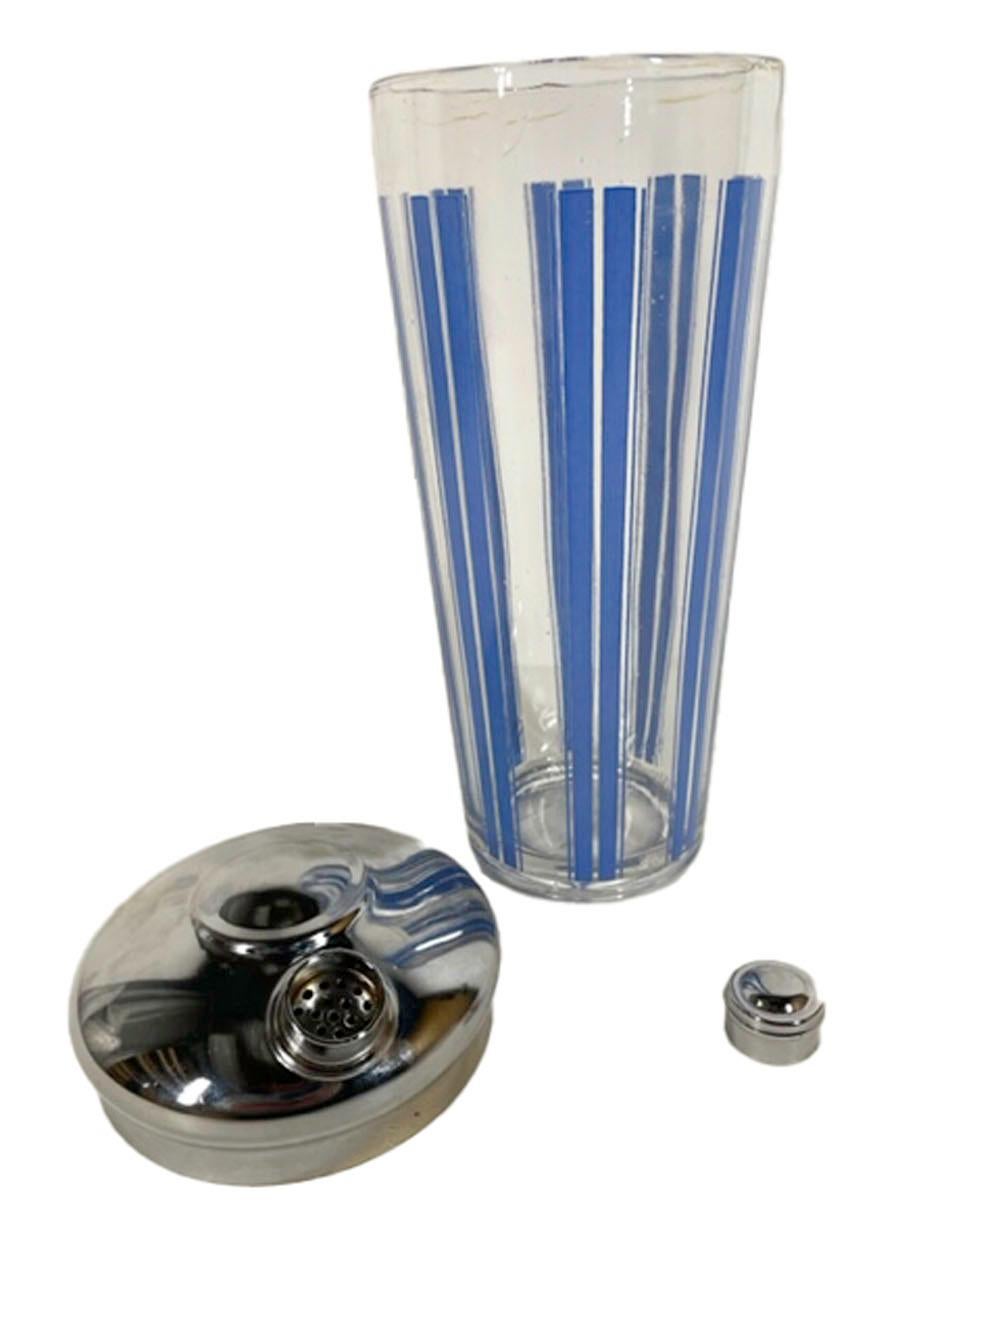 Three Piece Art Deco Cocktail Shaker Set with Blue Enamel Vertical Lines In Good Condition For Sale In Nantucket, MA